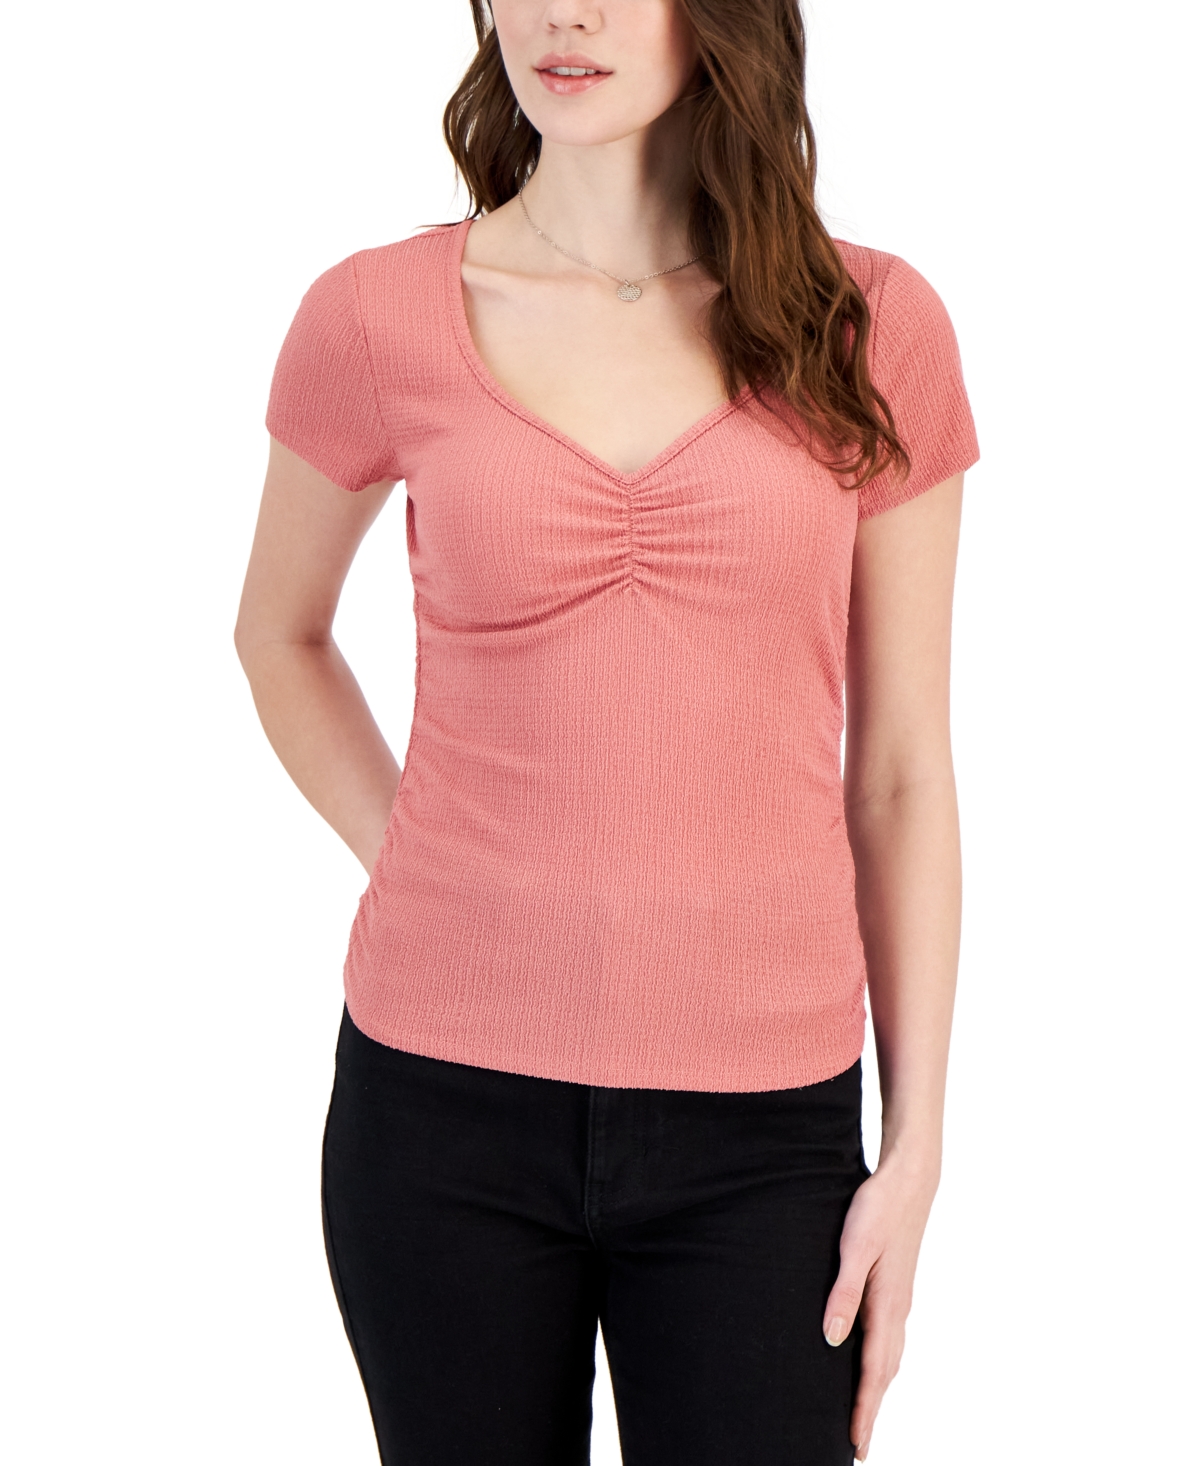 Planet Heart Juniors' Cinch Front Ribbed Tee In Dusty Rose